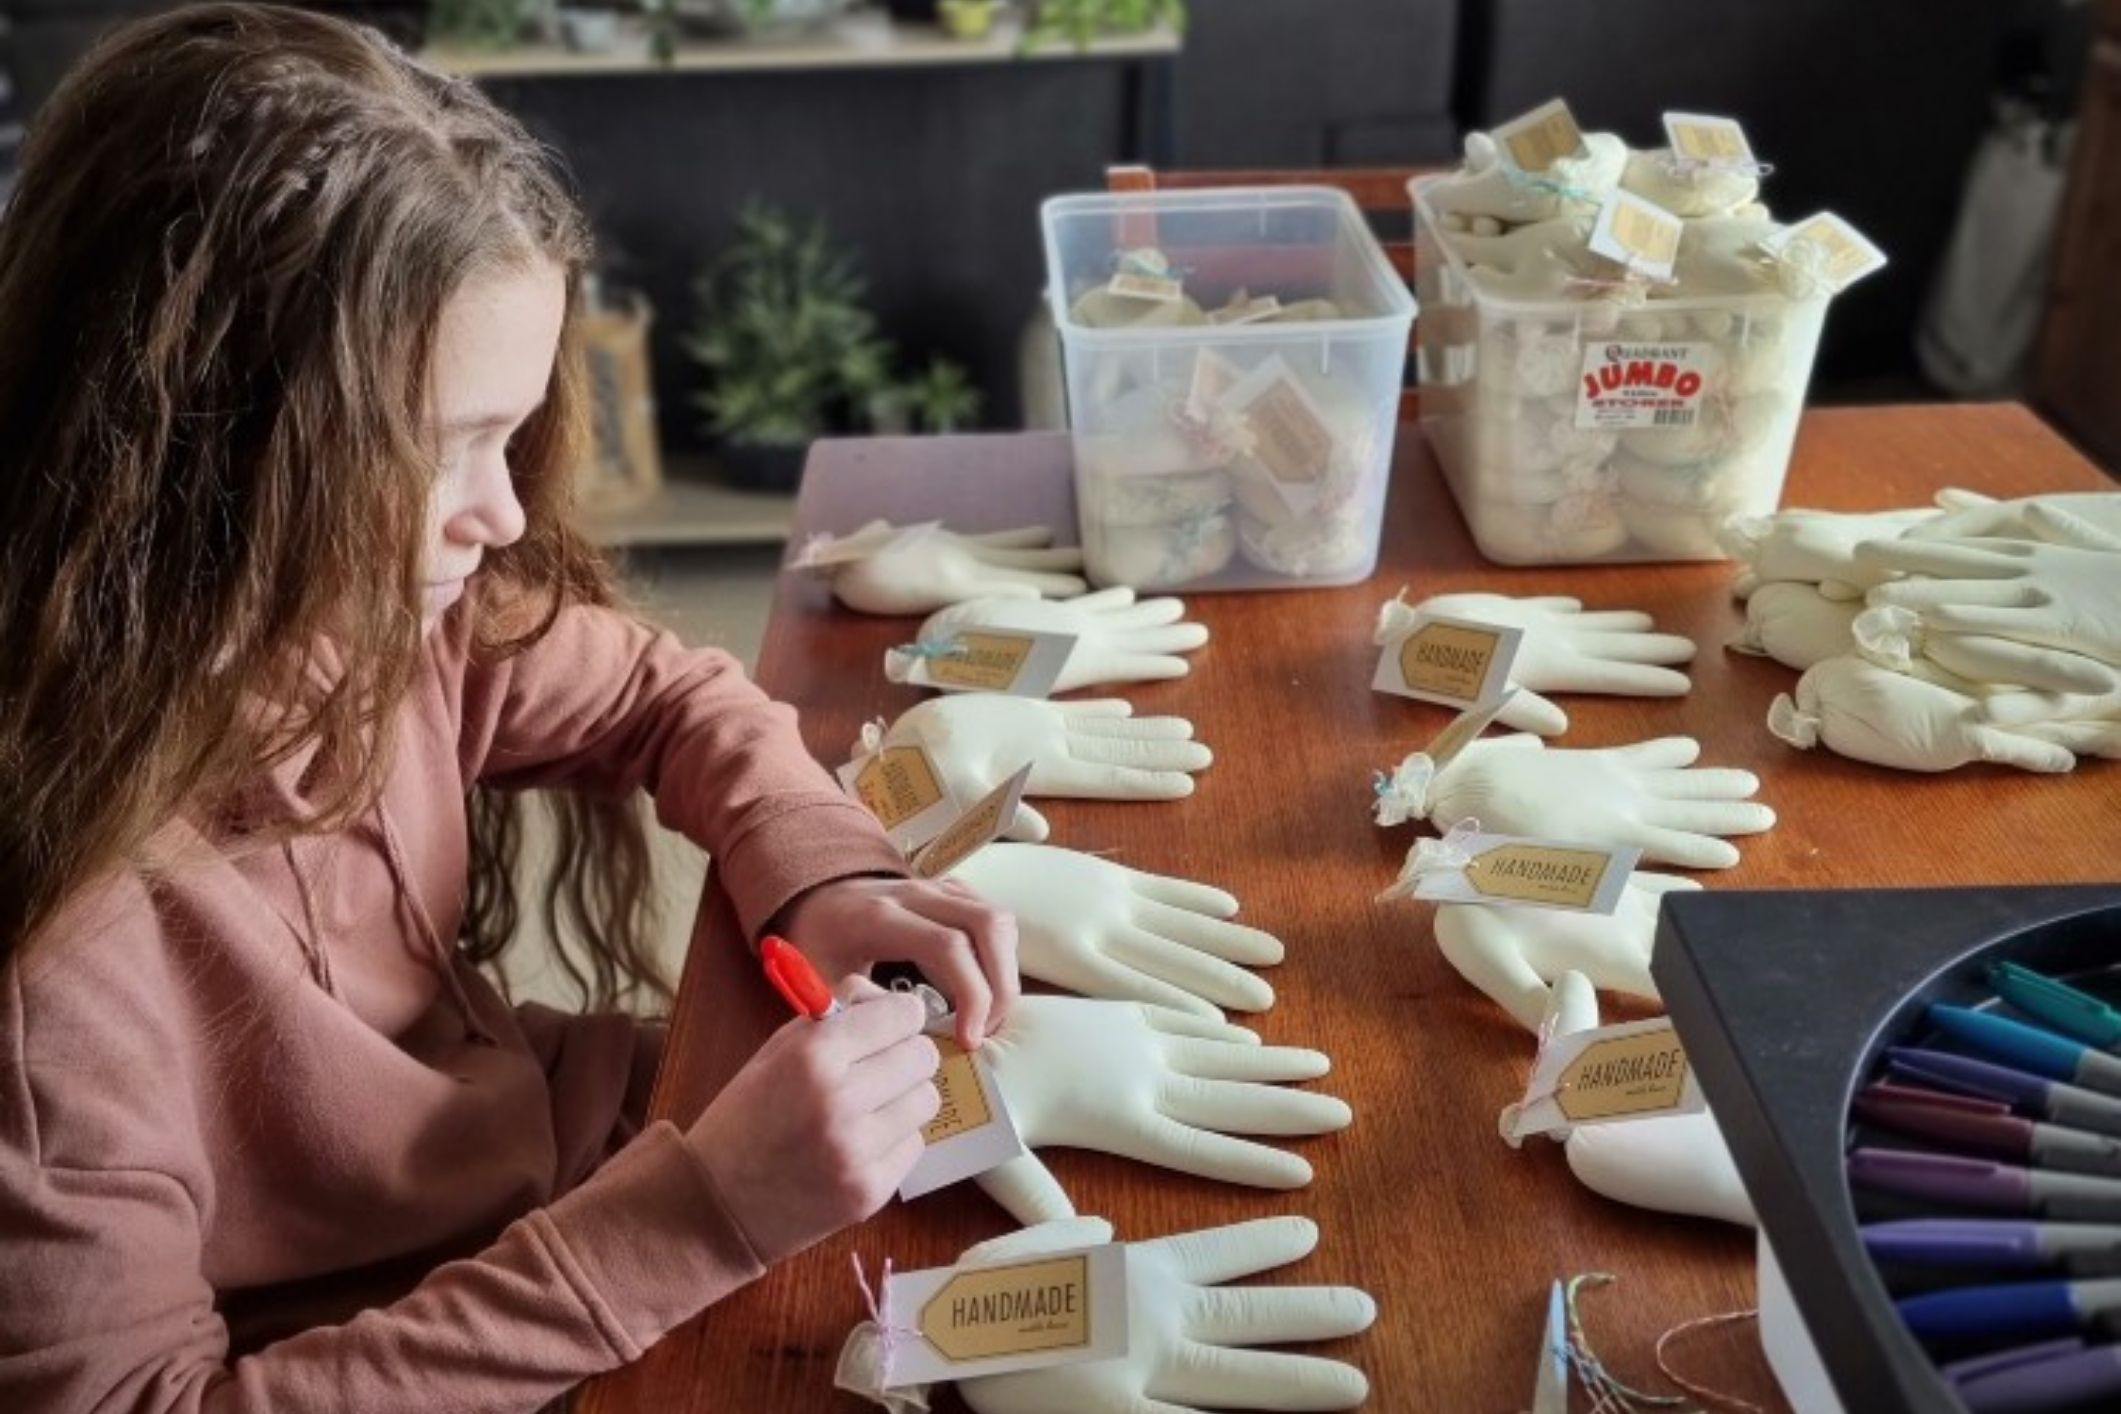 A young girl’s ‘Handmade’ gifts are warming the hearts of aged care residents